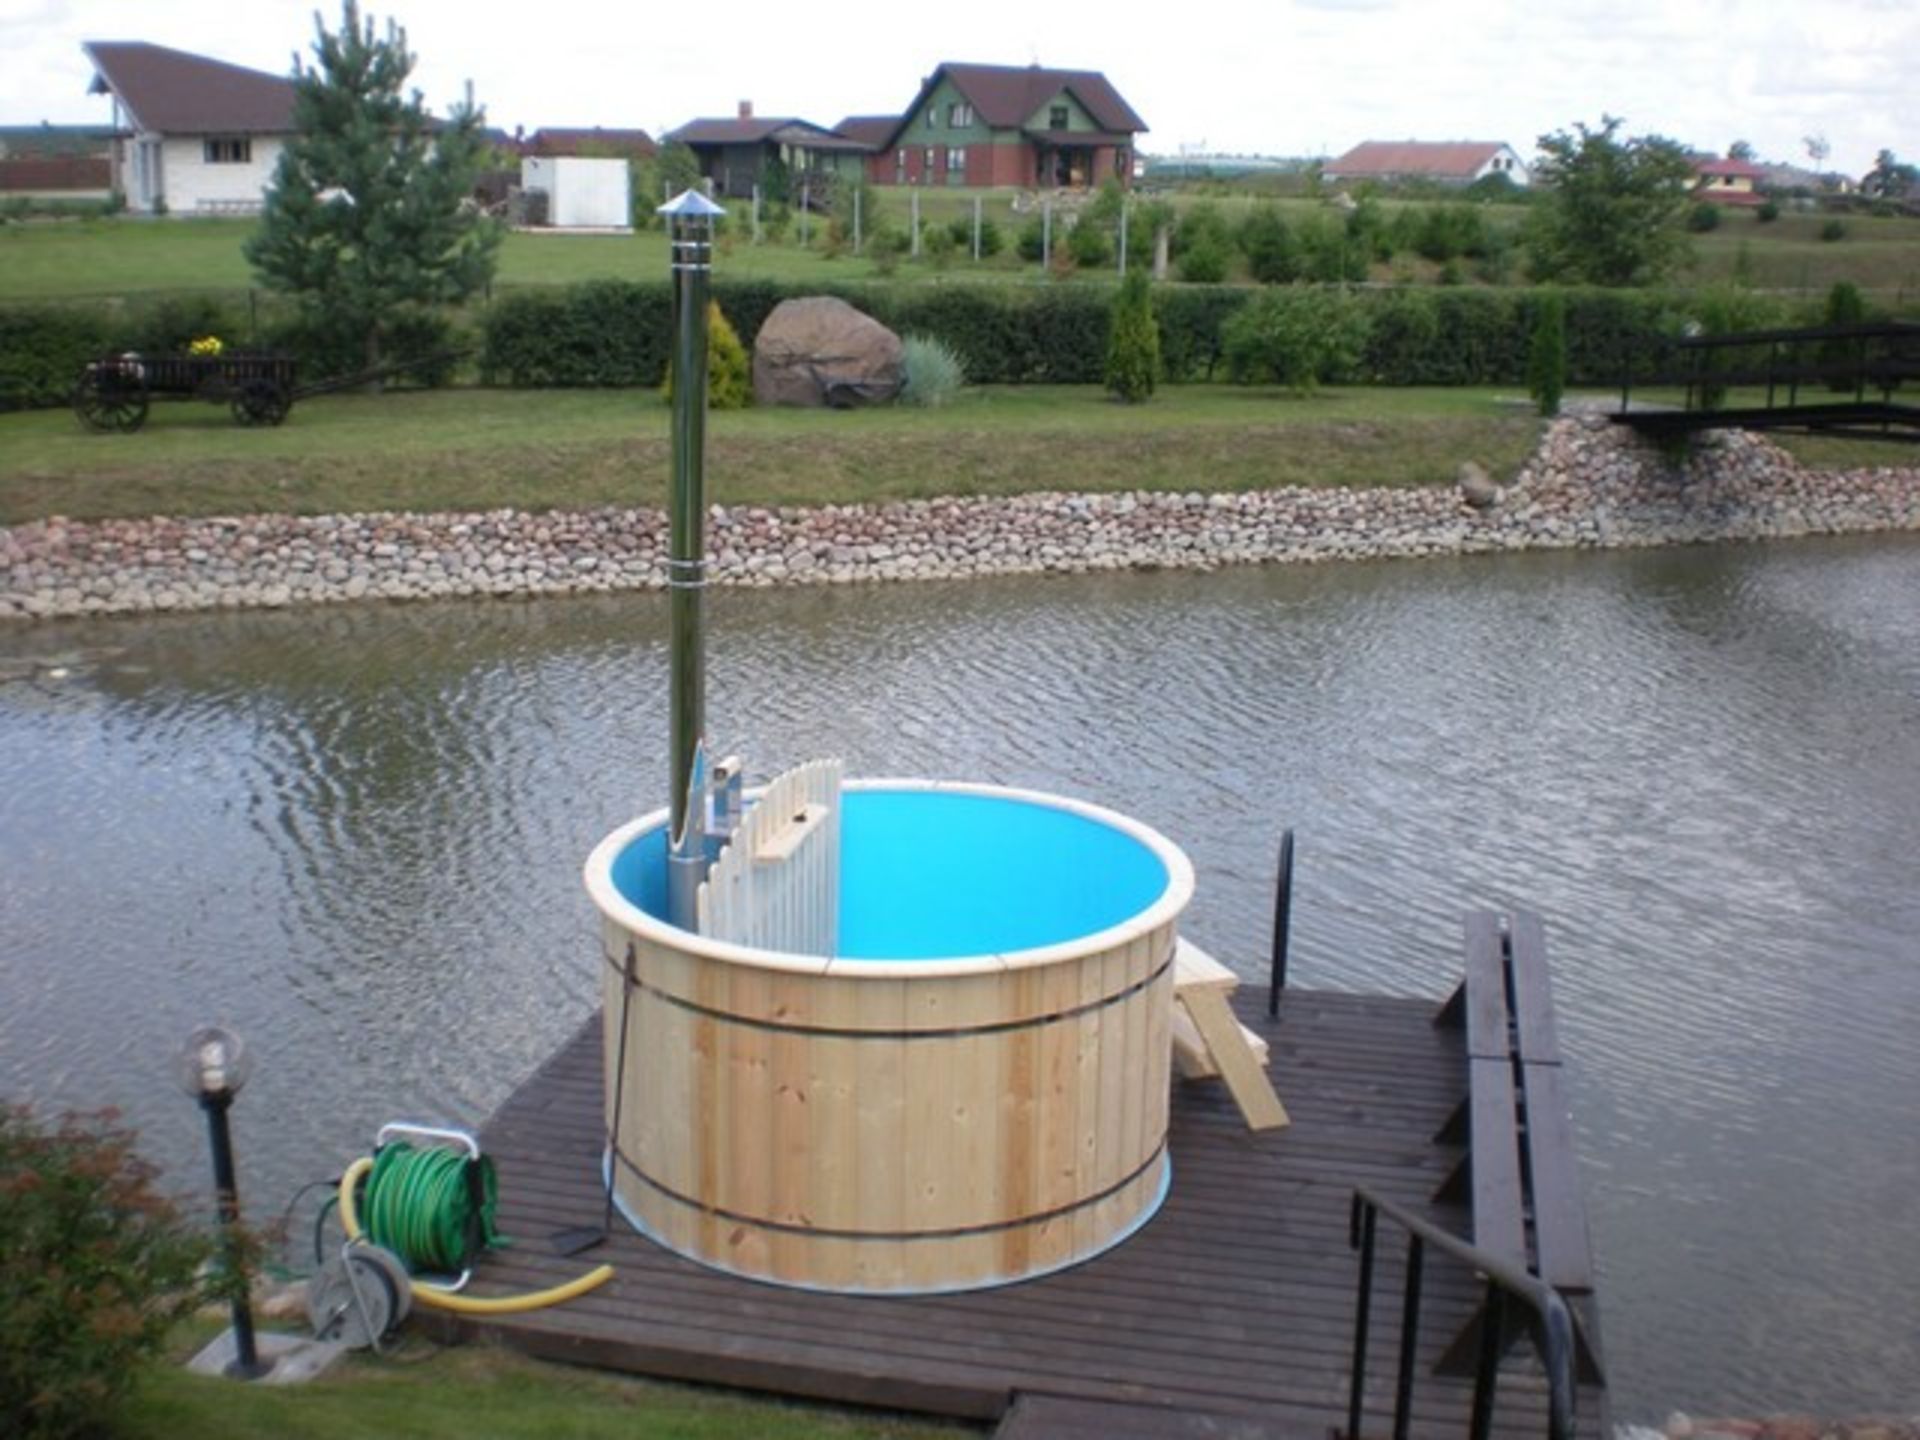 + VAT Brand New 1.5m Polypropylene Hot Tub with Wooden Finishing and Stainless Steel Heater with